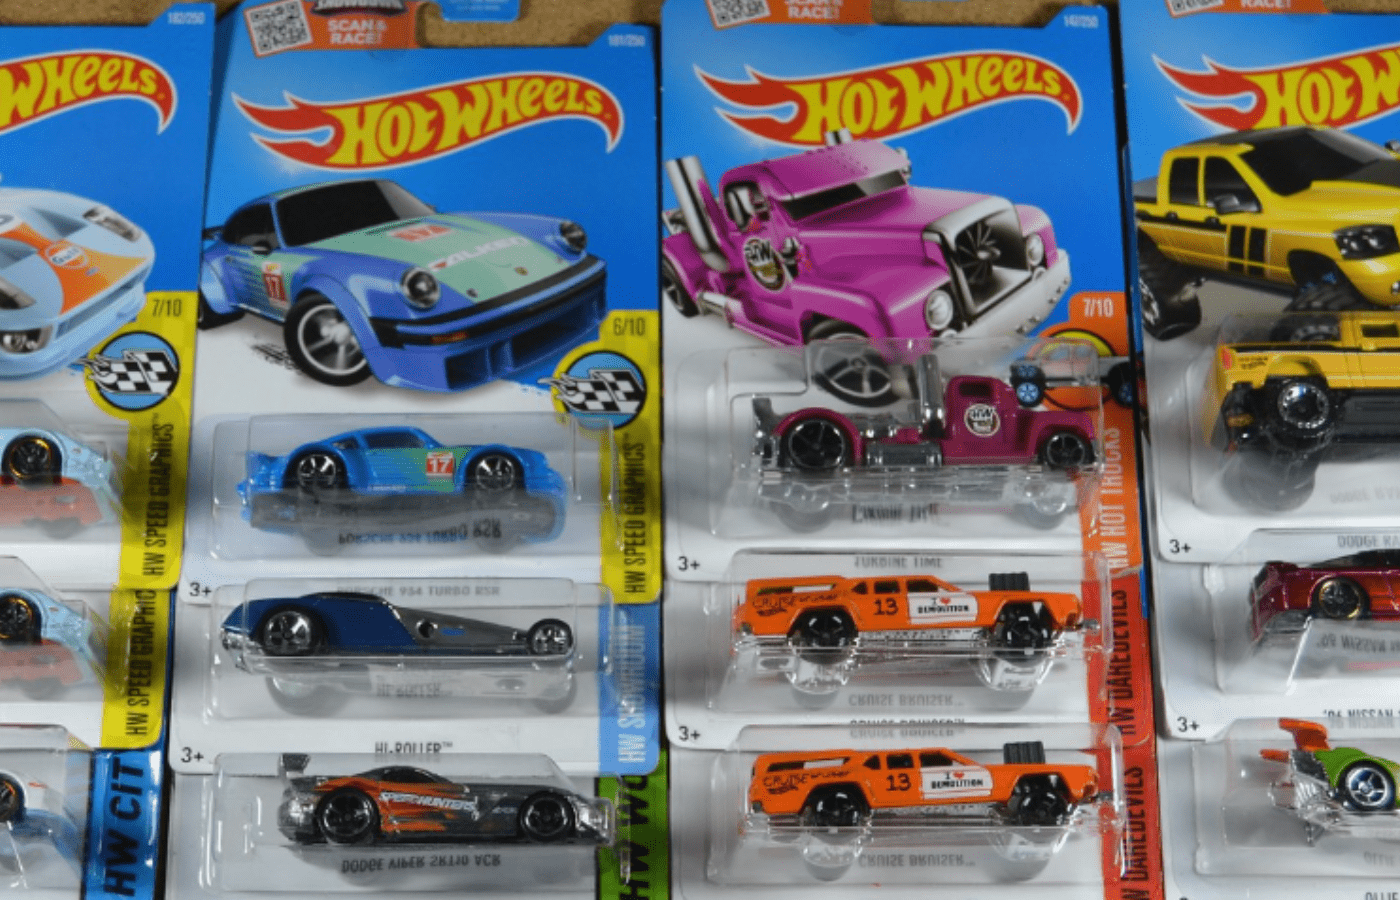 are hot wheels 164 scale